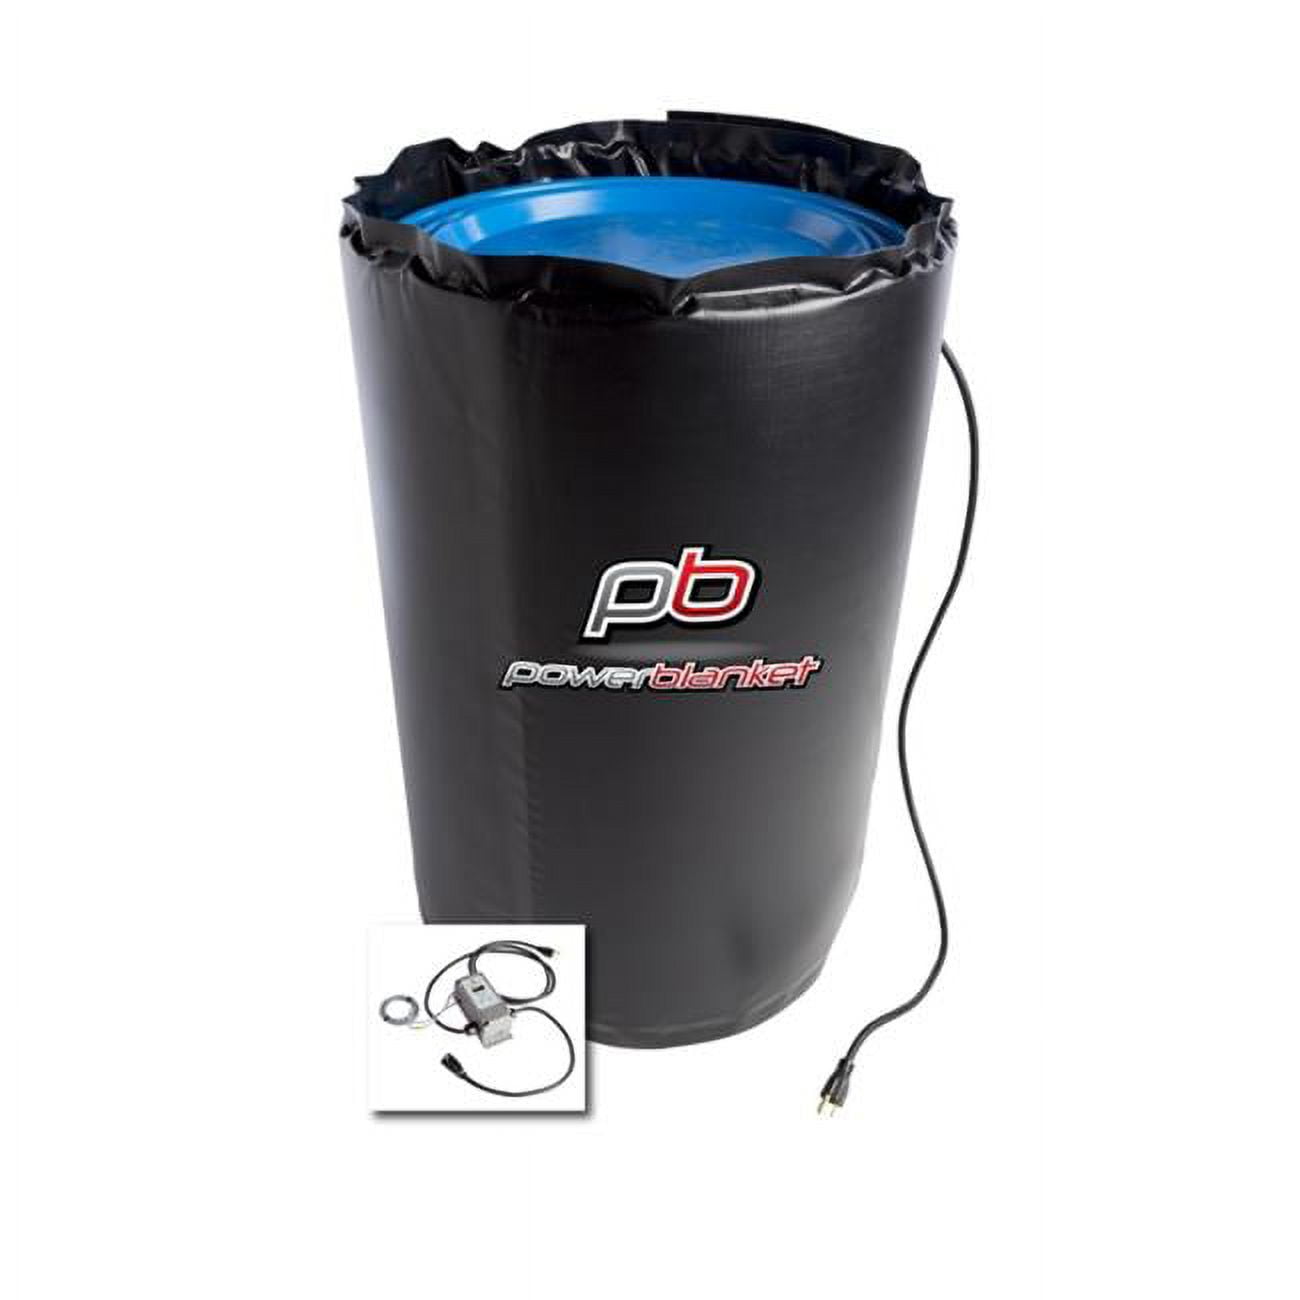 55 Gallon Insulated Drum Heating Blanket - BH55PRO-240V - w